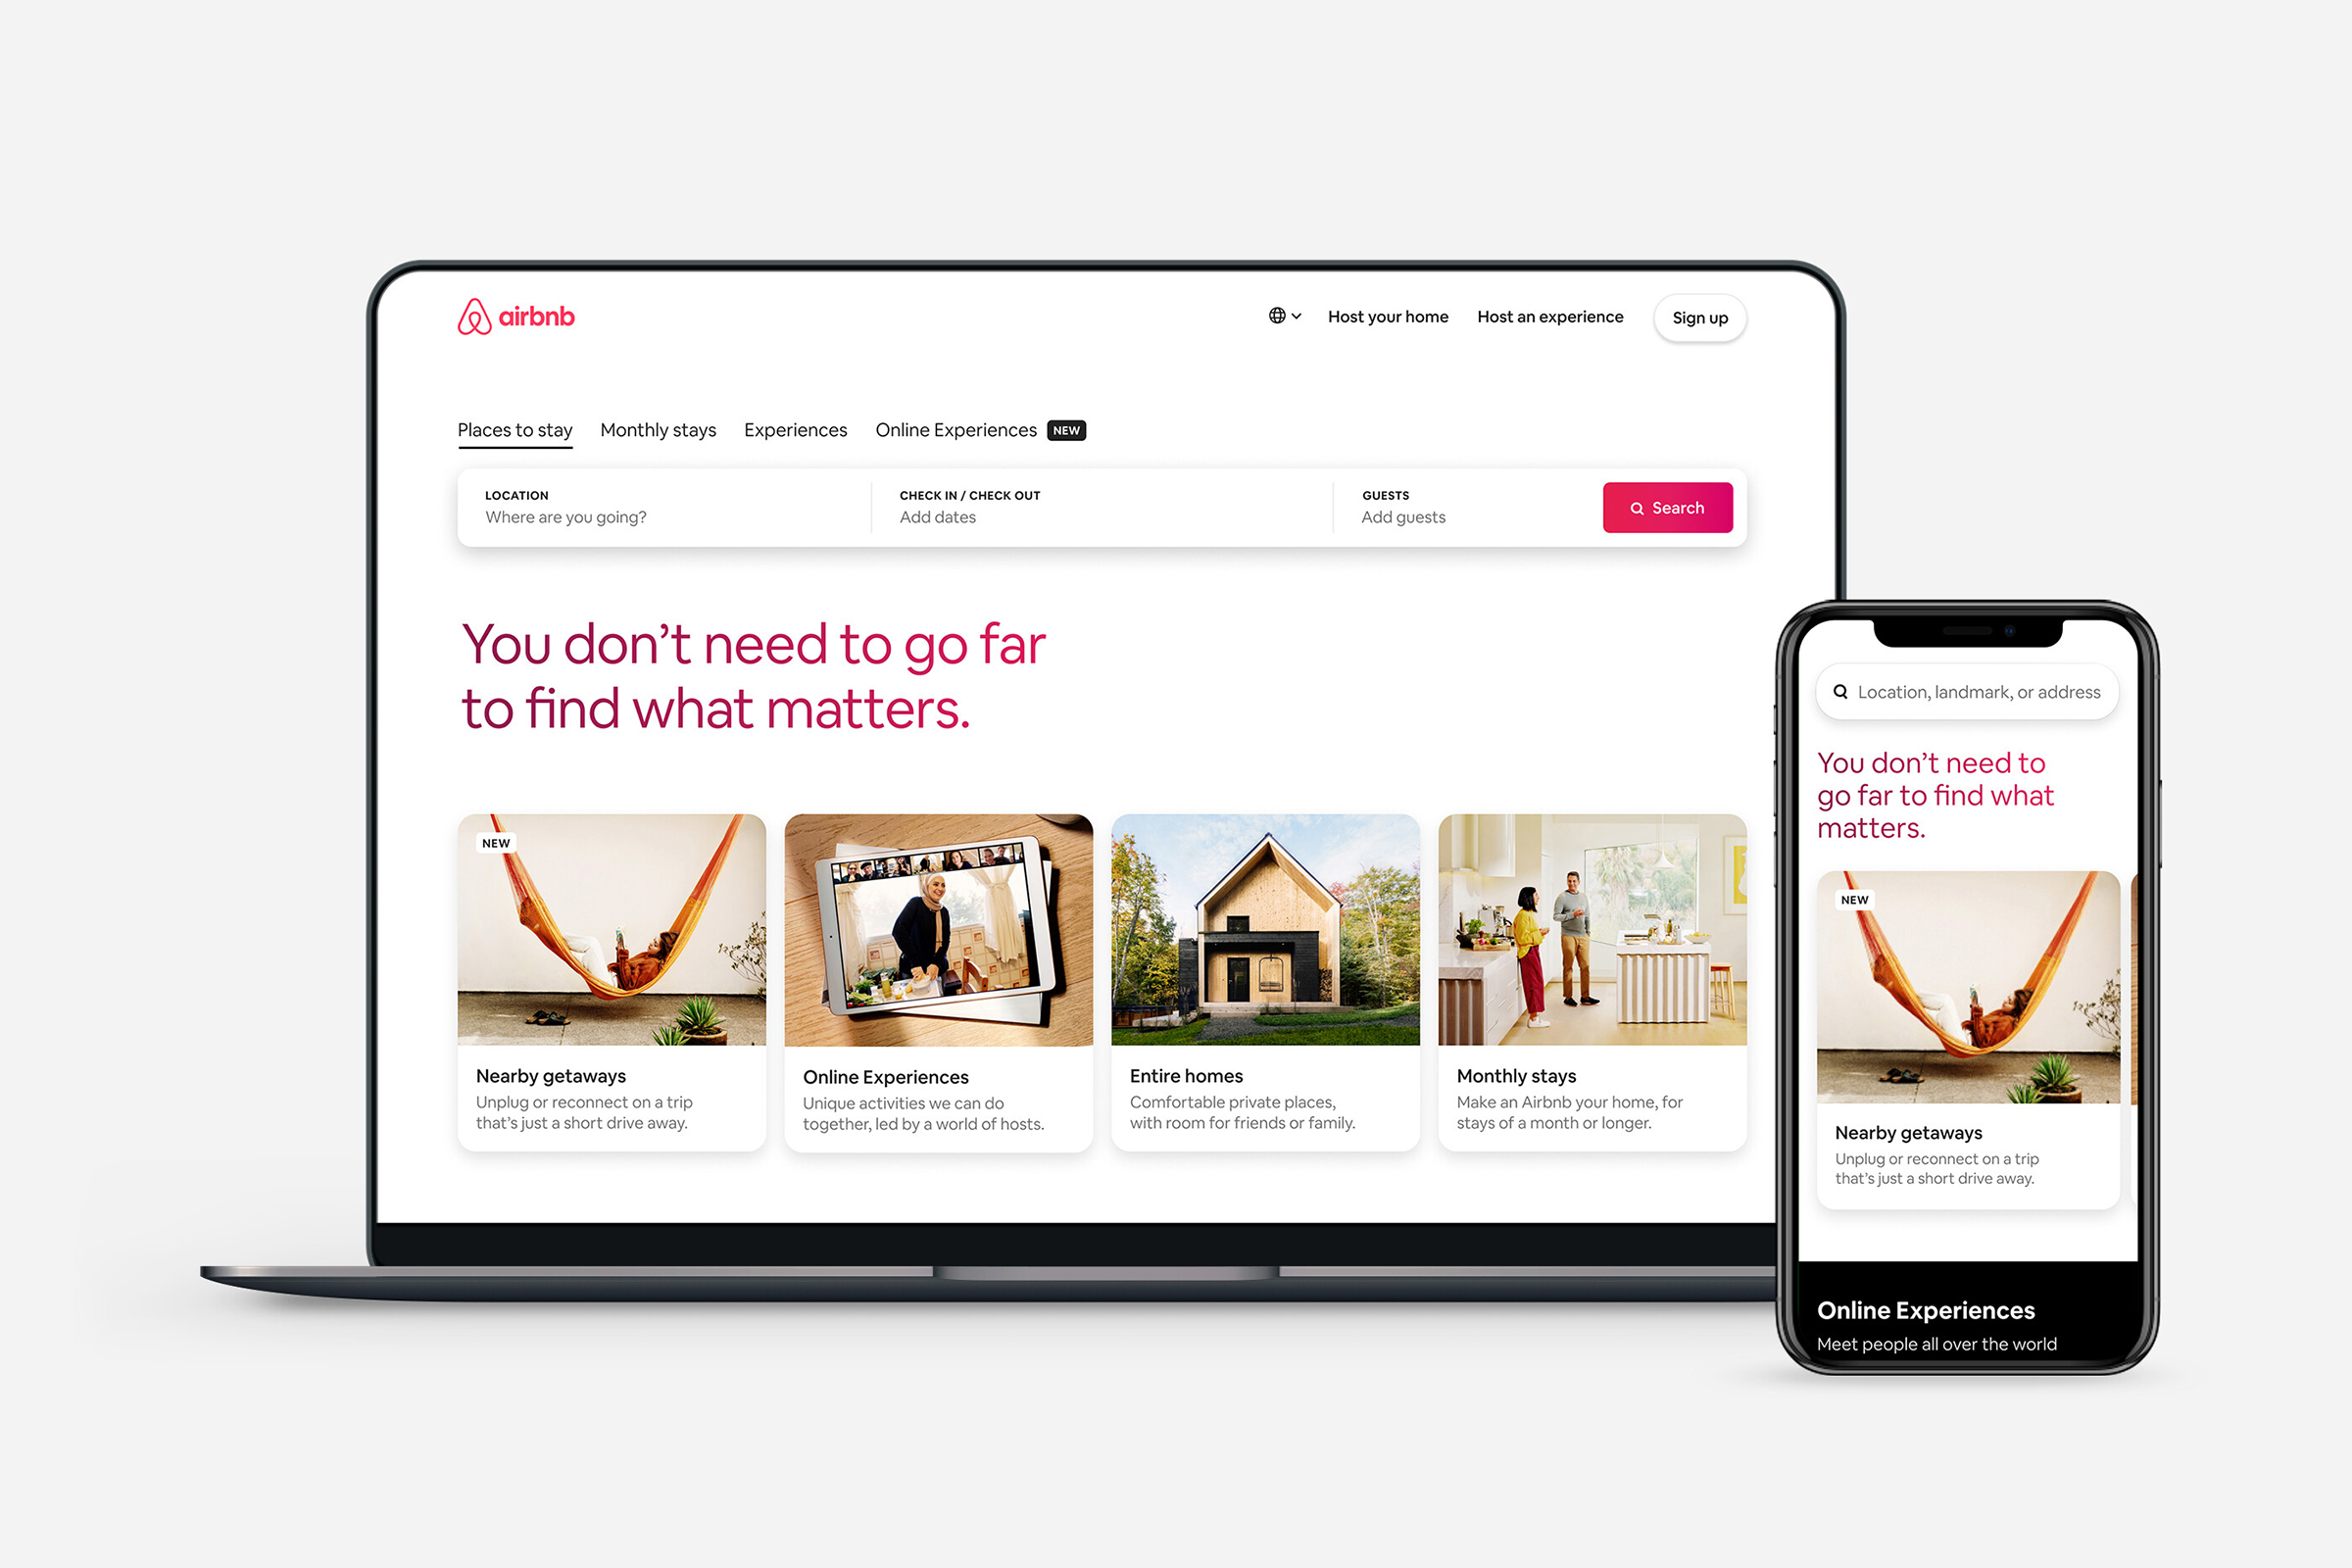 Airbnb Launches Campaign to Support Domestic Travel + Local Economic Growth